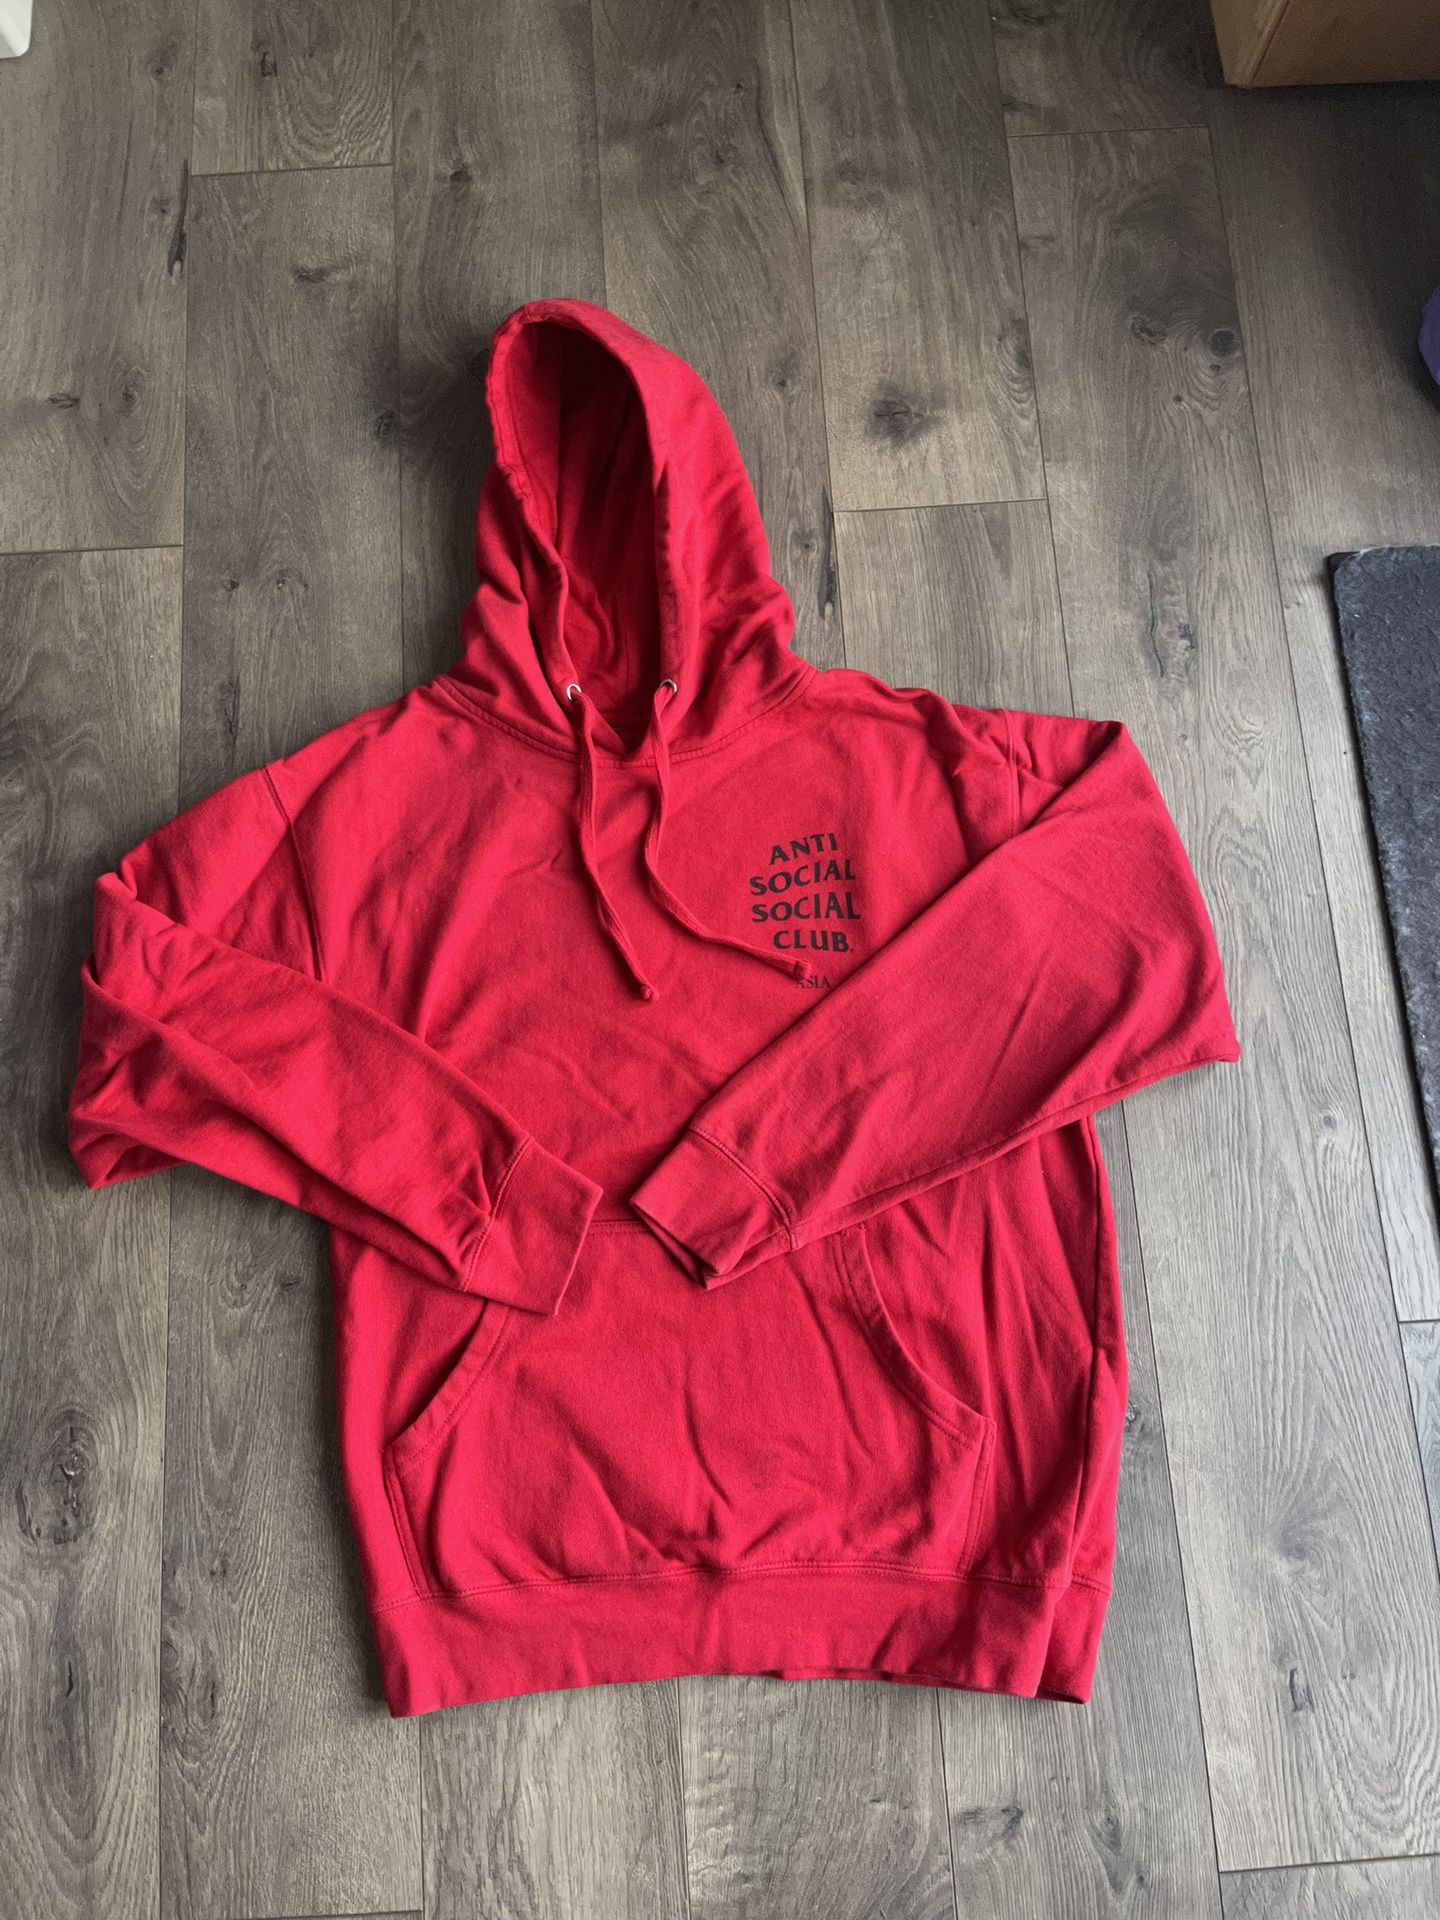 Anti Social Social Club Asia Hoodie for Sale in Wayland, MA - OfferUp